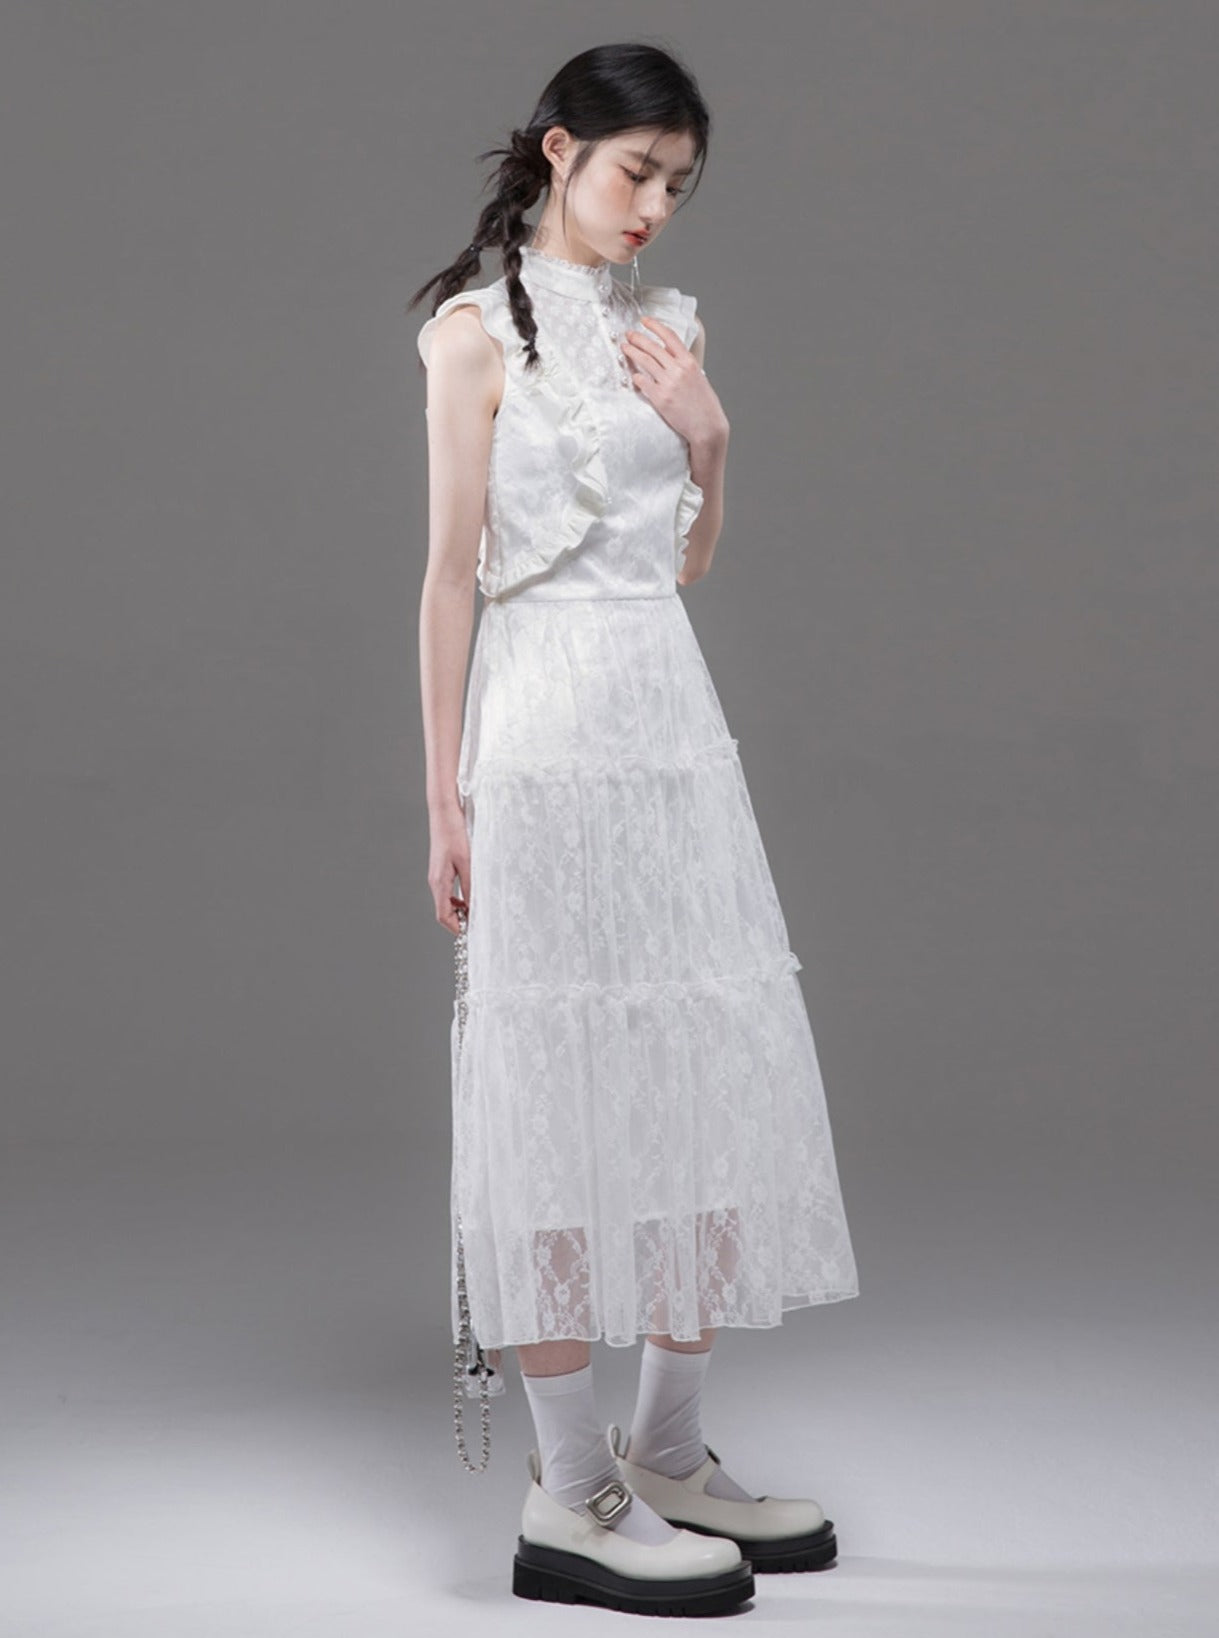 White Lace Stand-up Collar Dress